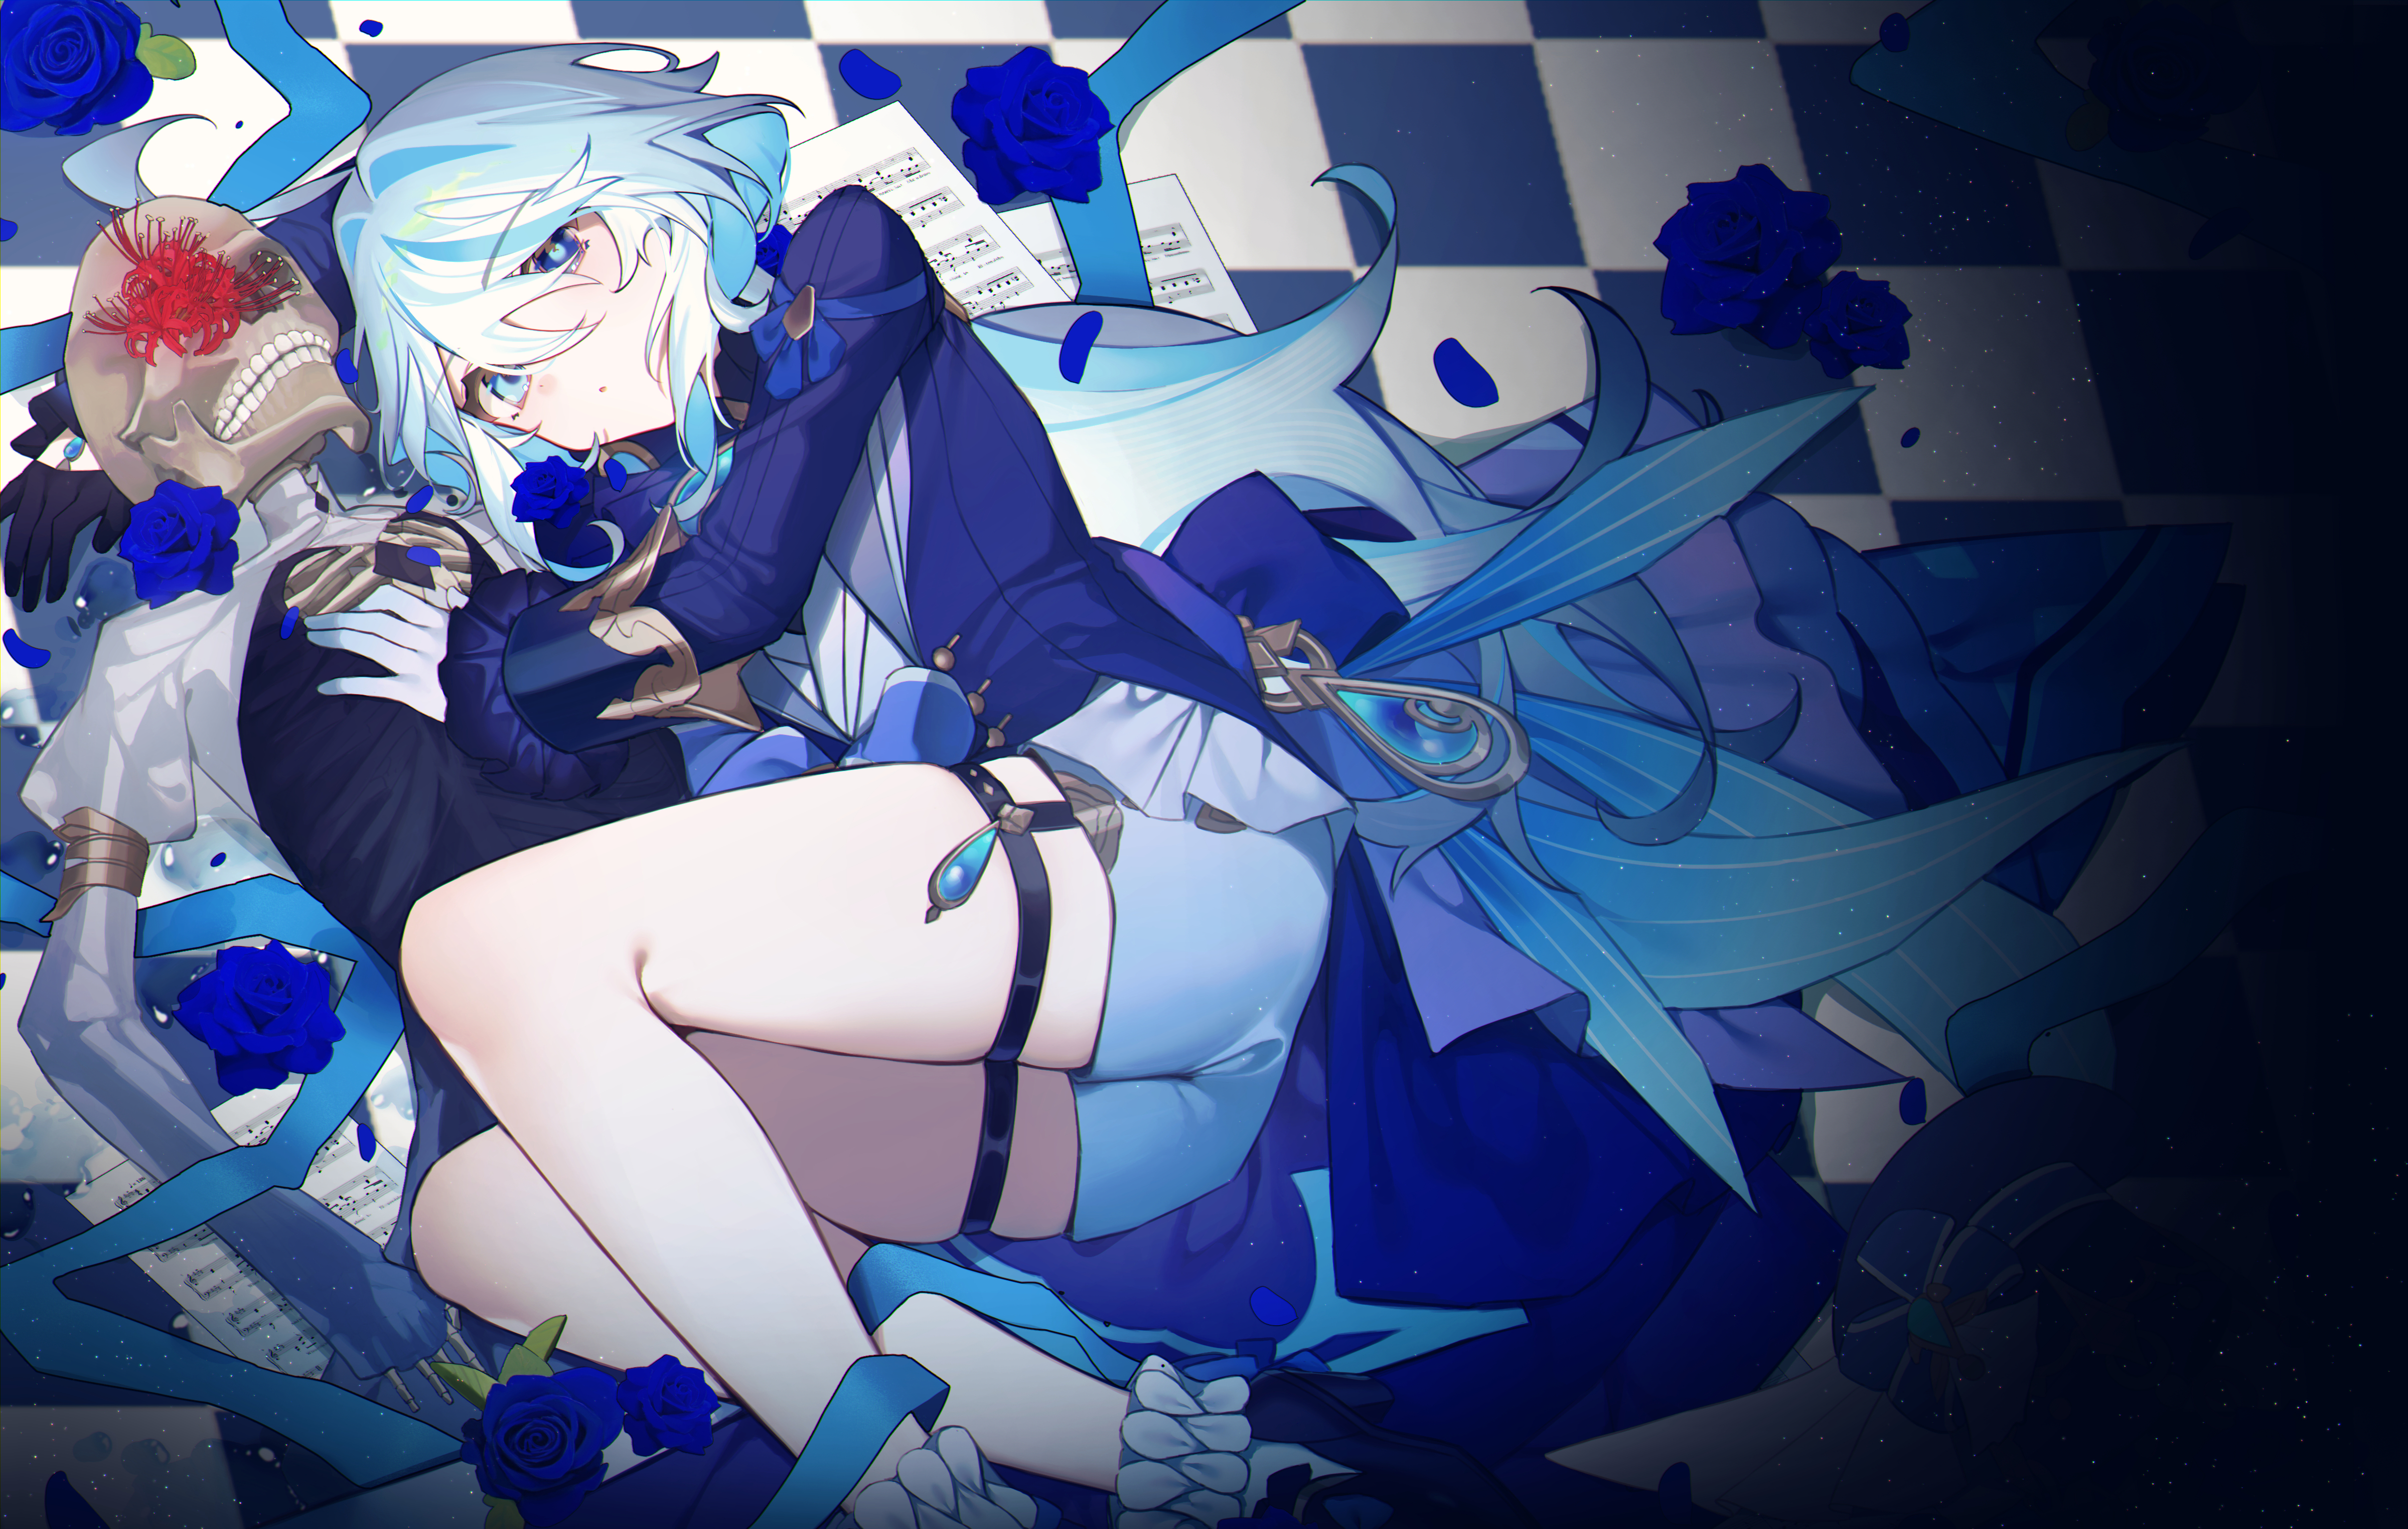 Anime 4800x3047 anime anime girls Genshin Impact checkered Furina (Genshin Impact) ass mismatched gloves lying down lying on side heterochromia blue eyes long hair two tone hair blue hair bent legs gemstones skeleton blue rose petals rose shorts gloves looking at viewer paper musical notes treble clef bass clef white socks socks